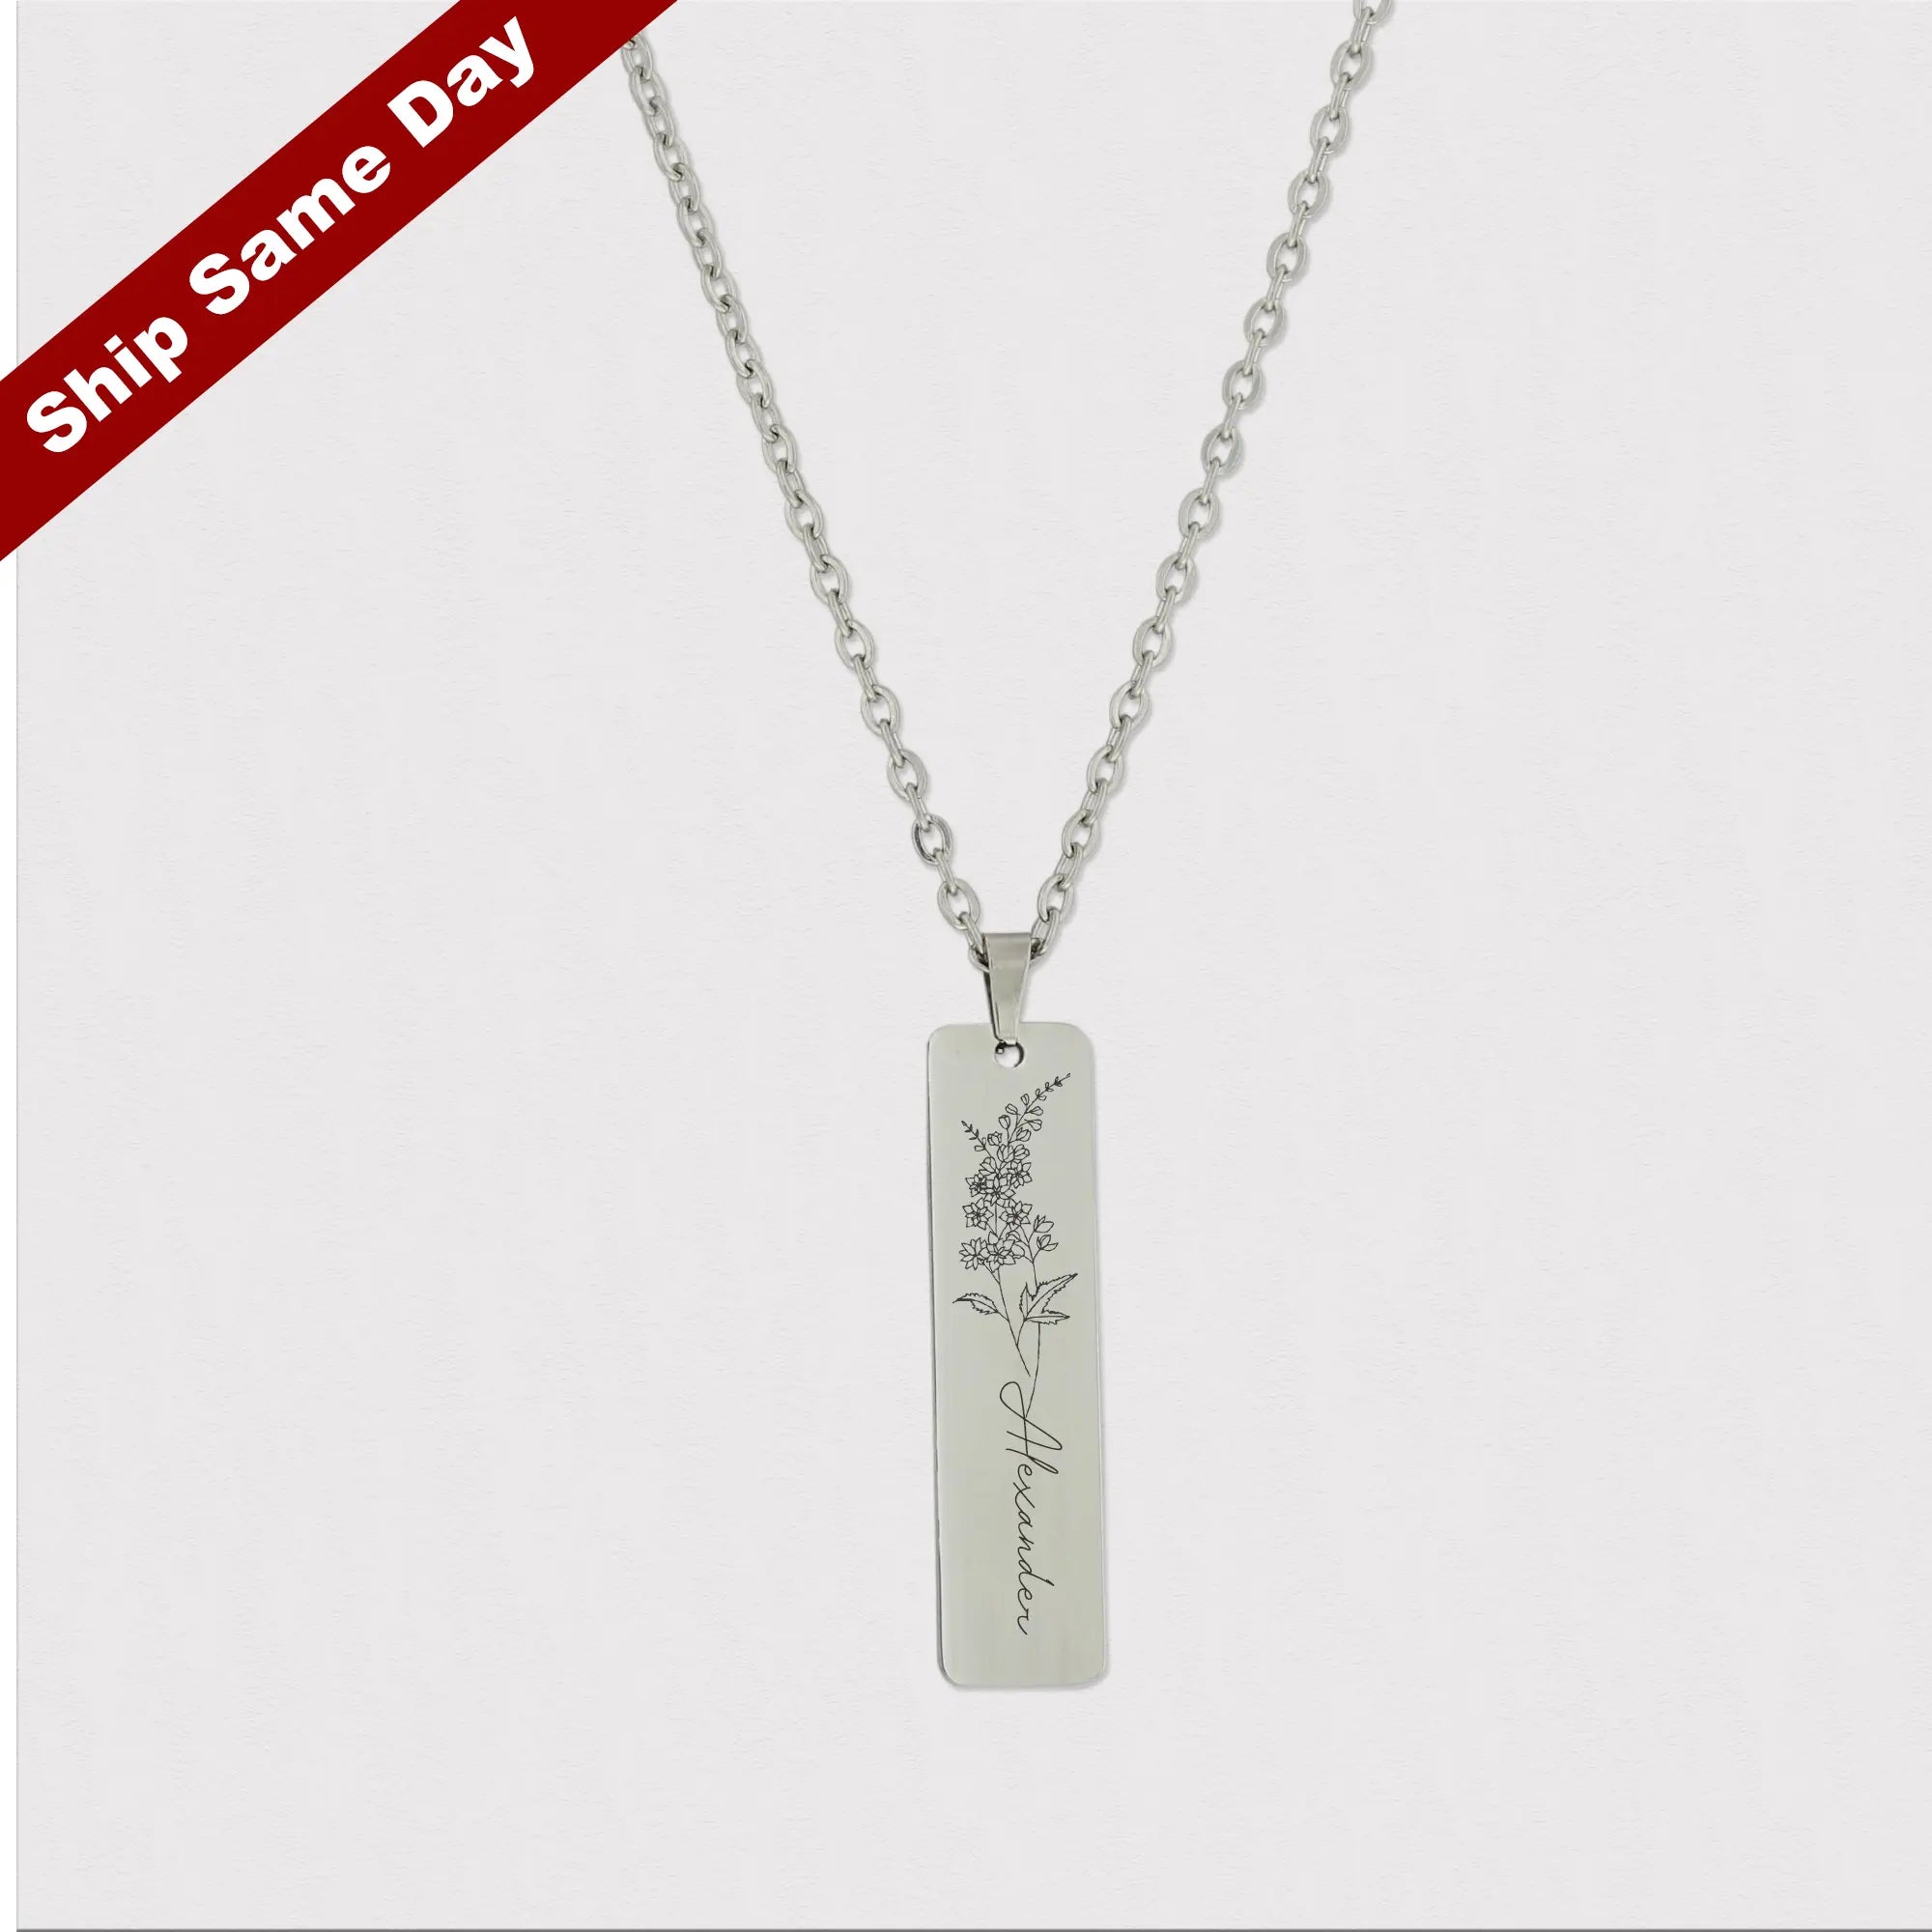  Birth Flower Necklace with Name Engraving